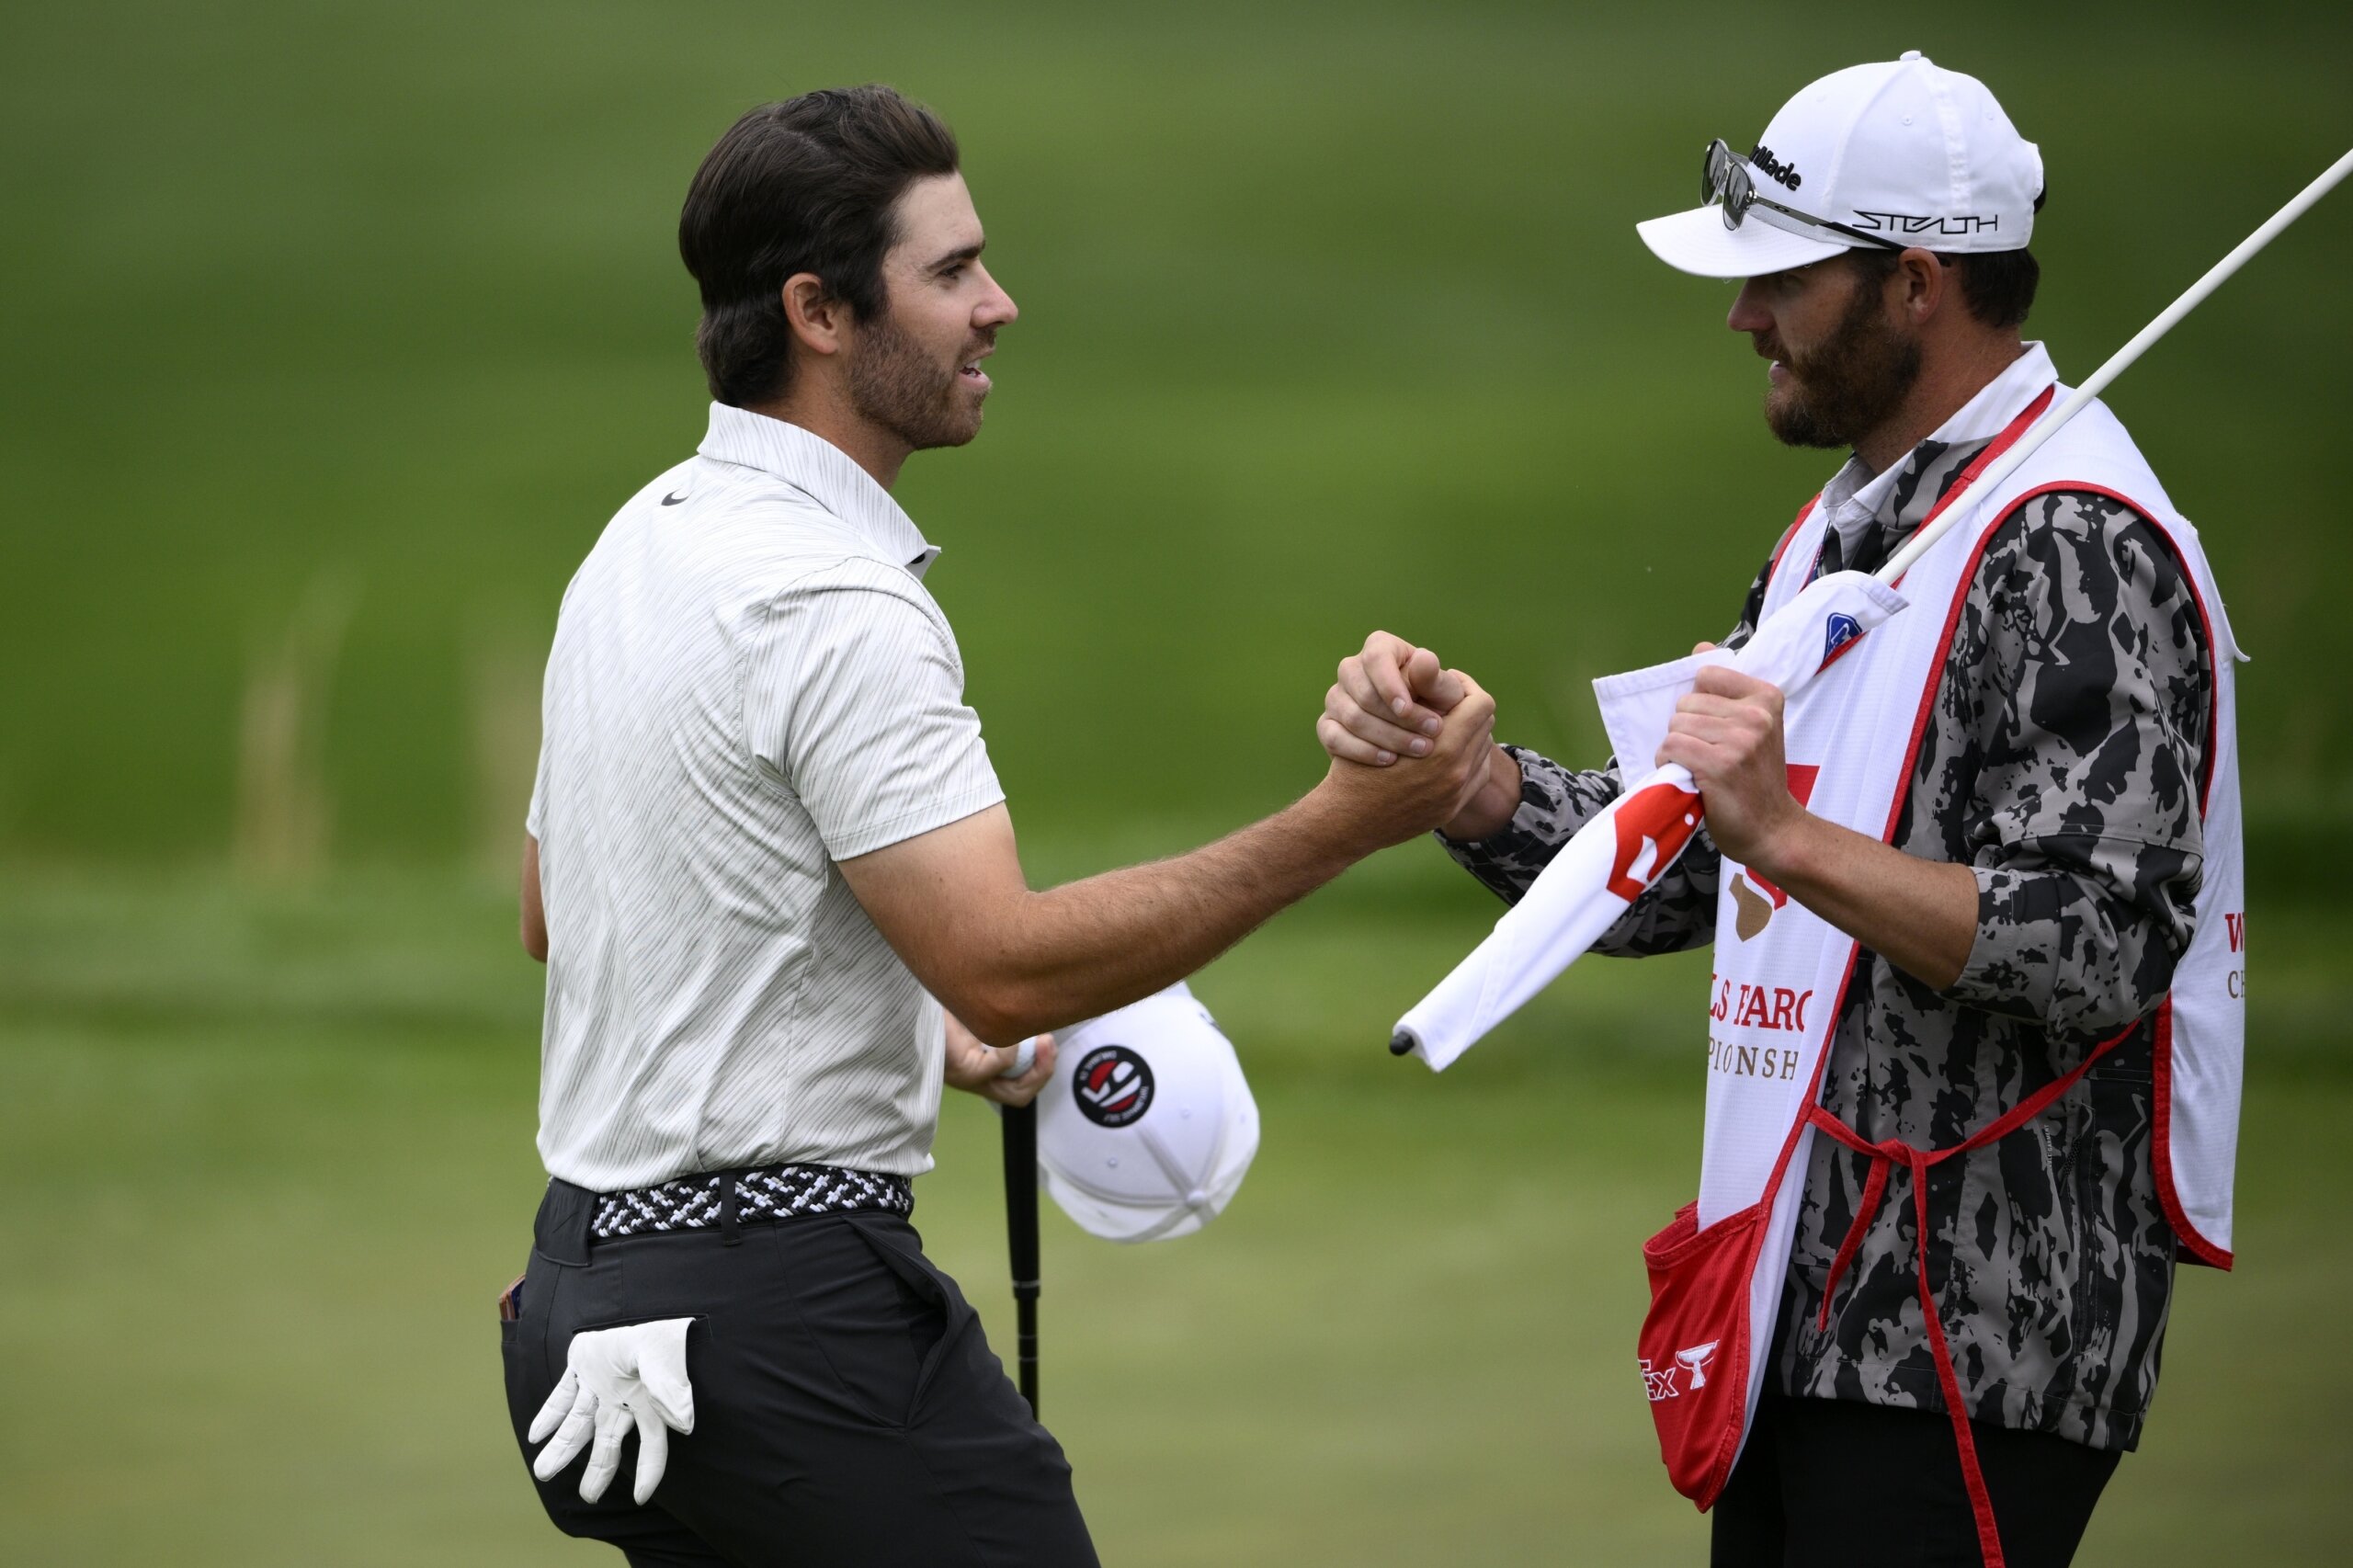 Jason Day ‘obsessed’ with new swing, leads Wells Fargo WTOP News